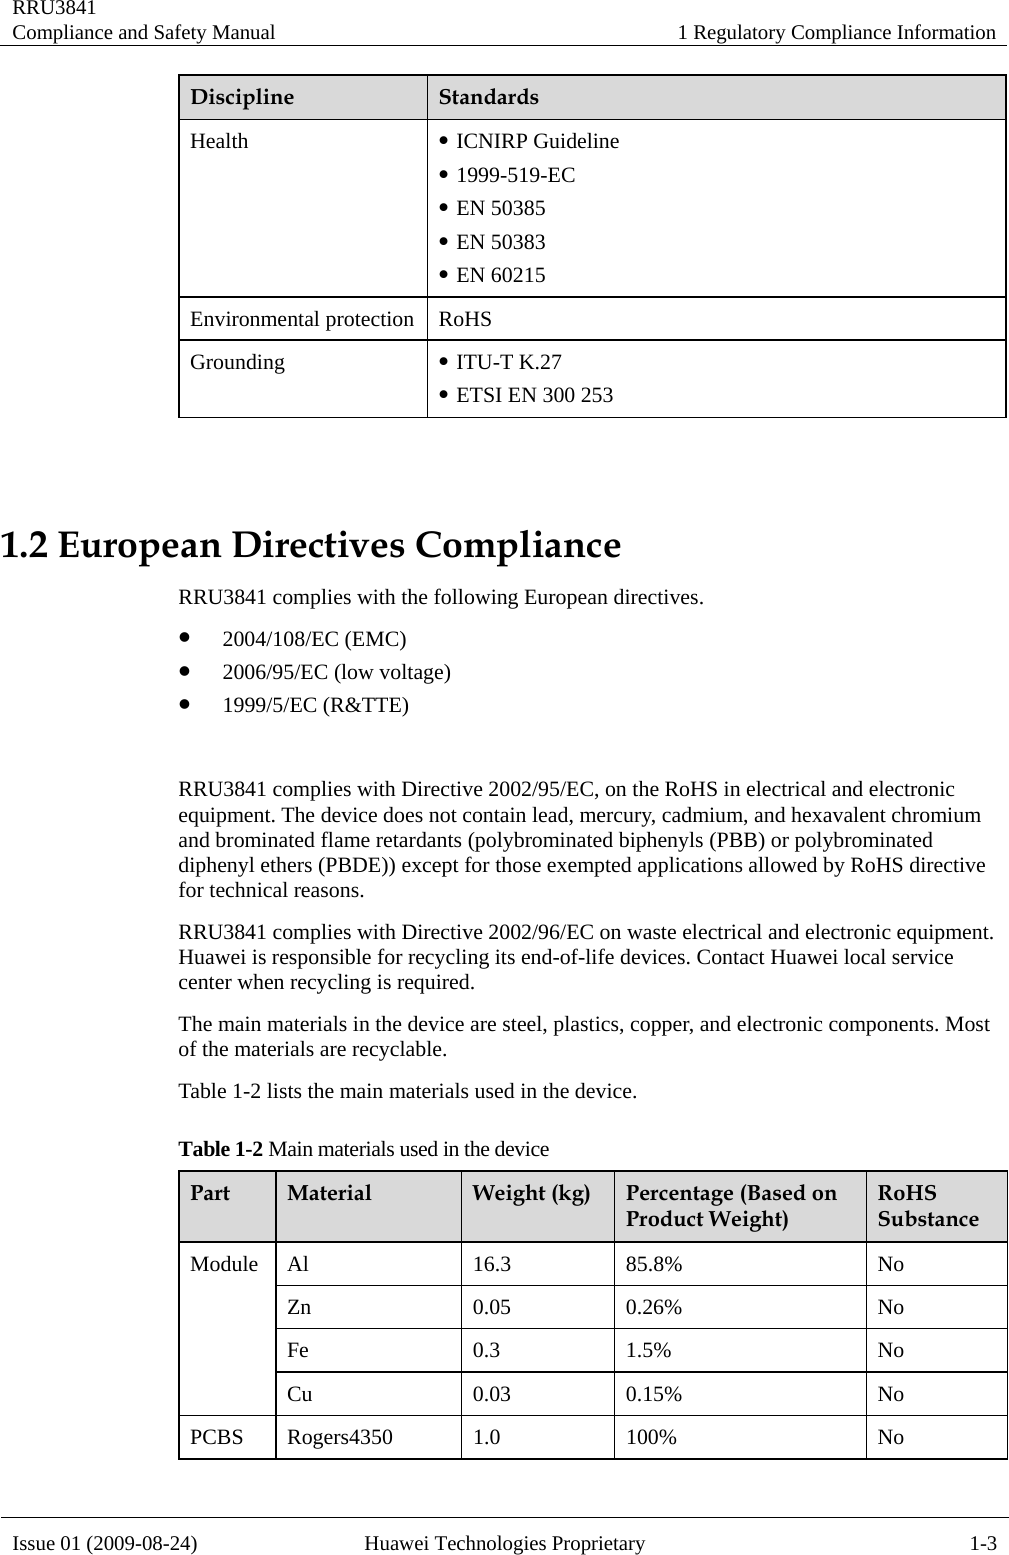 RRU3841 Compliance and Safety Manual  1 Regulatory Compliance Information  Issue 01 (2009-08-24)  Huawei Technologies Proprietary  1-3 Discipline  Standards Health  z ICNIRP Guideline z 1999-519-EC z EN 50385 z EN 50383 z EN 60215 Environmental protection RoHS Grounding  z ITU-T K.27 z ETSI EN 300 253  1.2 European Directives Compliance RRU3841 complies with the following European directives.   z 2004/108/EC (EMC) z 2006/95/EC (low voltage) z 1999/5/EC (R&amp;TTE)  RRU3841 complies with Directive 2002/95/EC, on the RoHS in electrical and electronic equipment. The device does not contain lead, mercury, cadmium, and hexavalent chromium and brominated flame retardants (polybrominated biphenyls (PBB) or polybrominated diphenyl ethers (PBDE)) except for those exempted applications allowed by RoHS directive for technical reasons. RRU3841 complies with Directive 2002/96/EC on waste electrical and electronic equipment. Huawei is responsible for recycling its end-of-life devices. Contact Huawei local service center when recycling is required. The main materials in the device are steel, plastics, copper, and electronic components. Most of the materials are recyclable. Table 1-2 lists the main materials used in the device. Table 1-2 Main materials used in the device   Part  Material  Weight (kg)  Percentage (Based on Product Weight) RoHS Substance Module Al 16.3 85.8%  No Zn 0.05 0.26%  No  Fe 0.3 1.5%  No  Cu 0.03 0.15%  No  PCBS Rogers4350  1.0  100%  No 